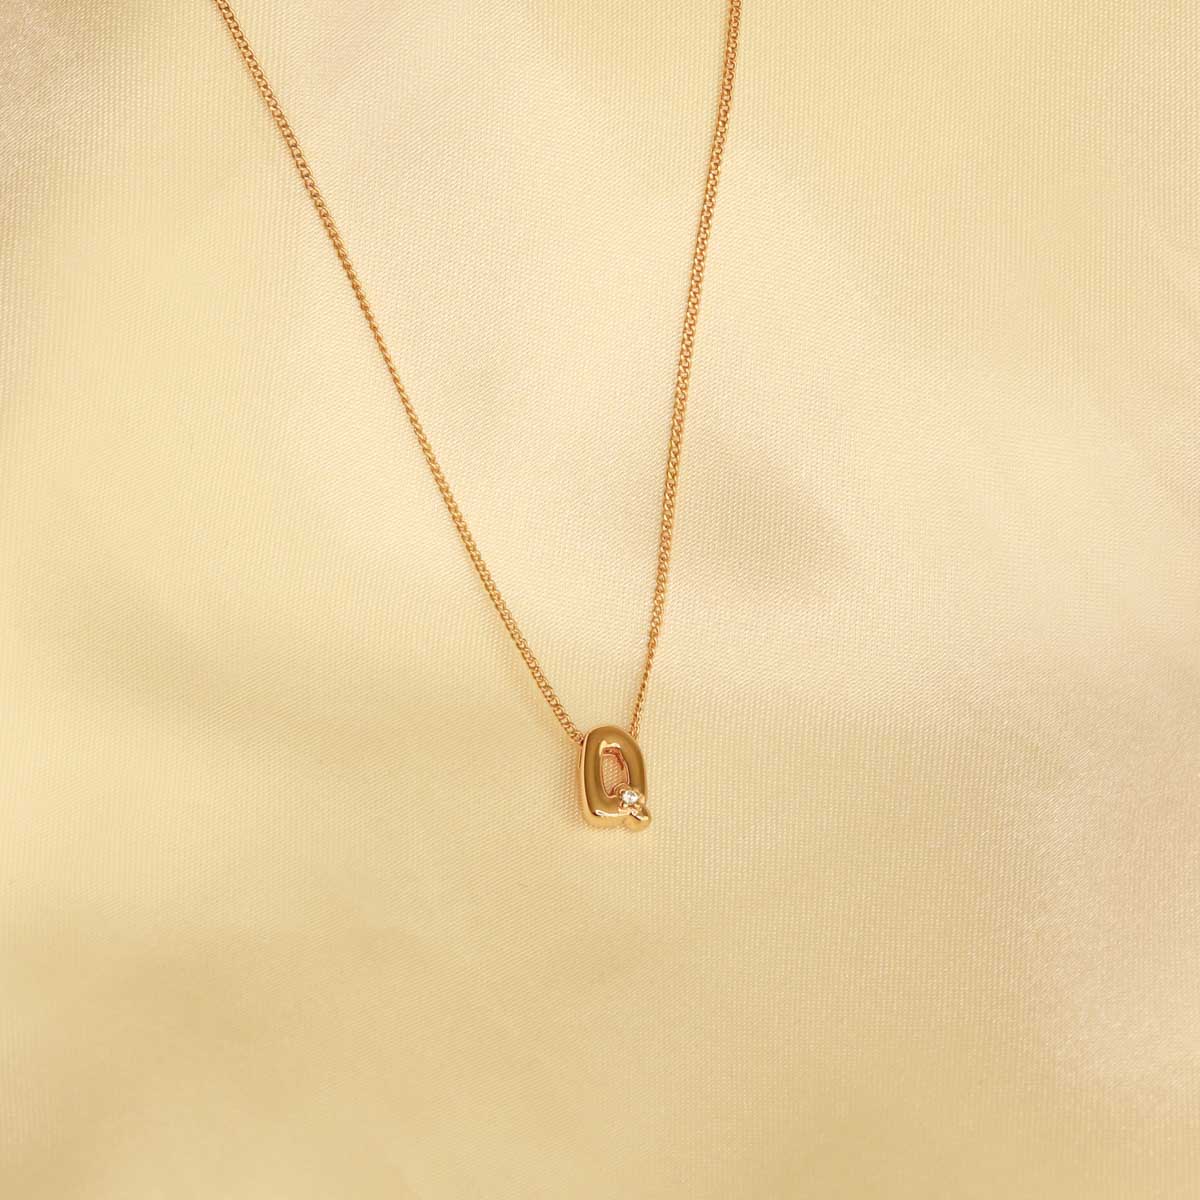 Flat lay shot of Q Initial Pendant Necklace in Gold